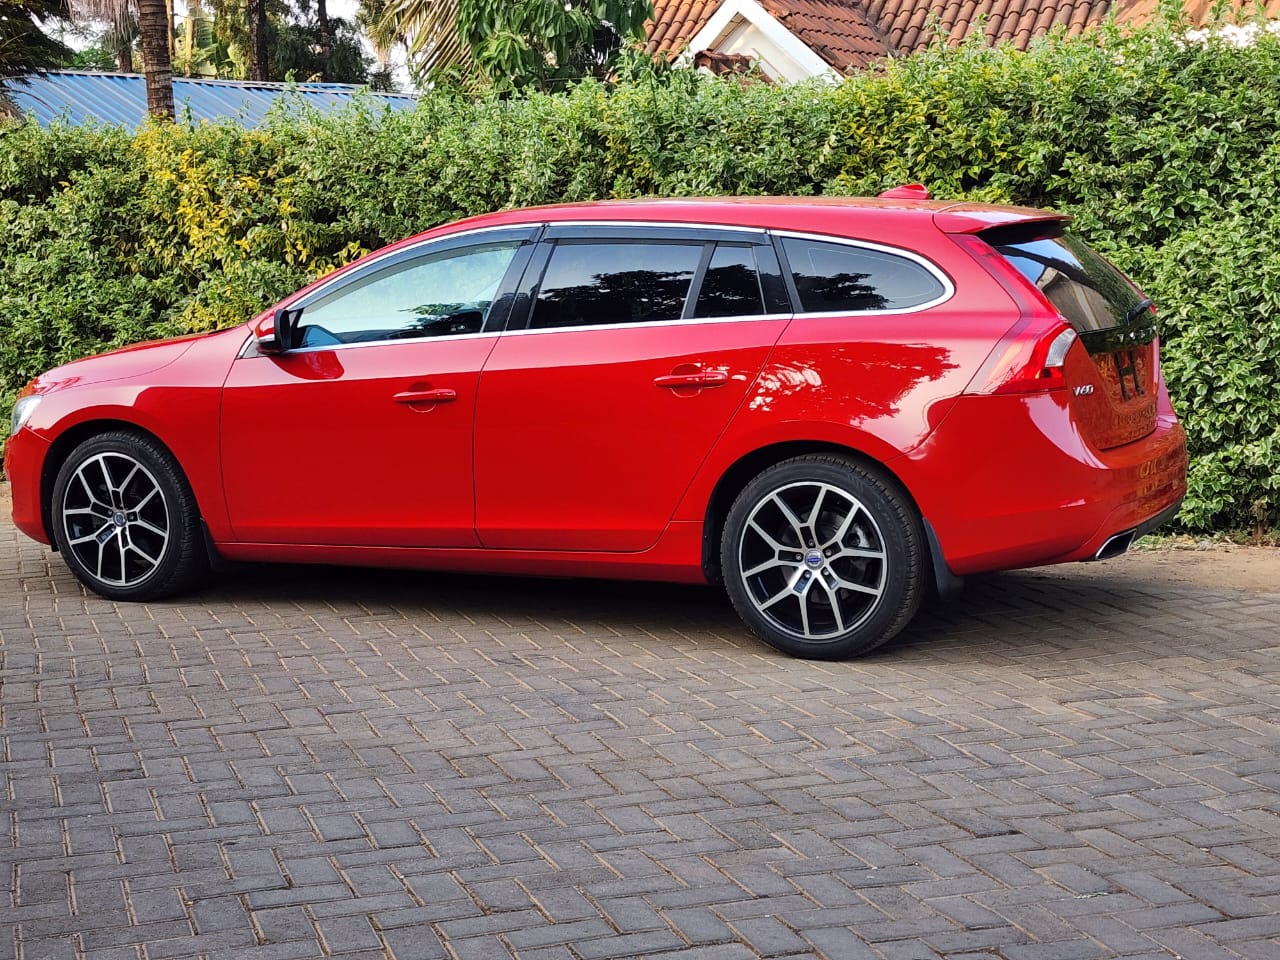 Volvo V40 D4 2015 Hot Deal You Pay 30% DEPOSIT TRADE IN OK